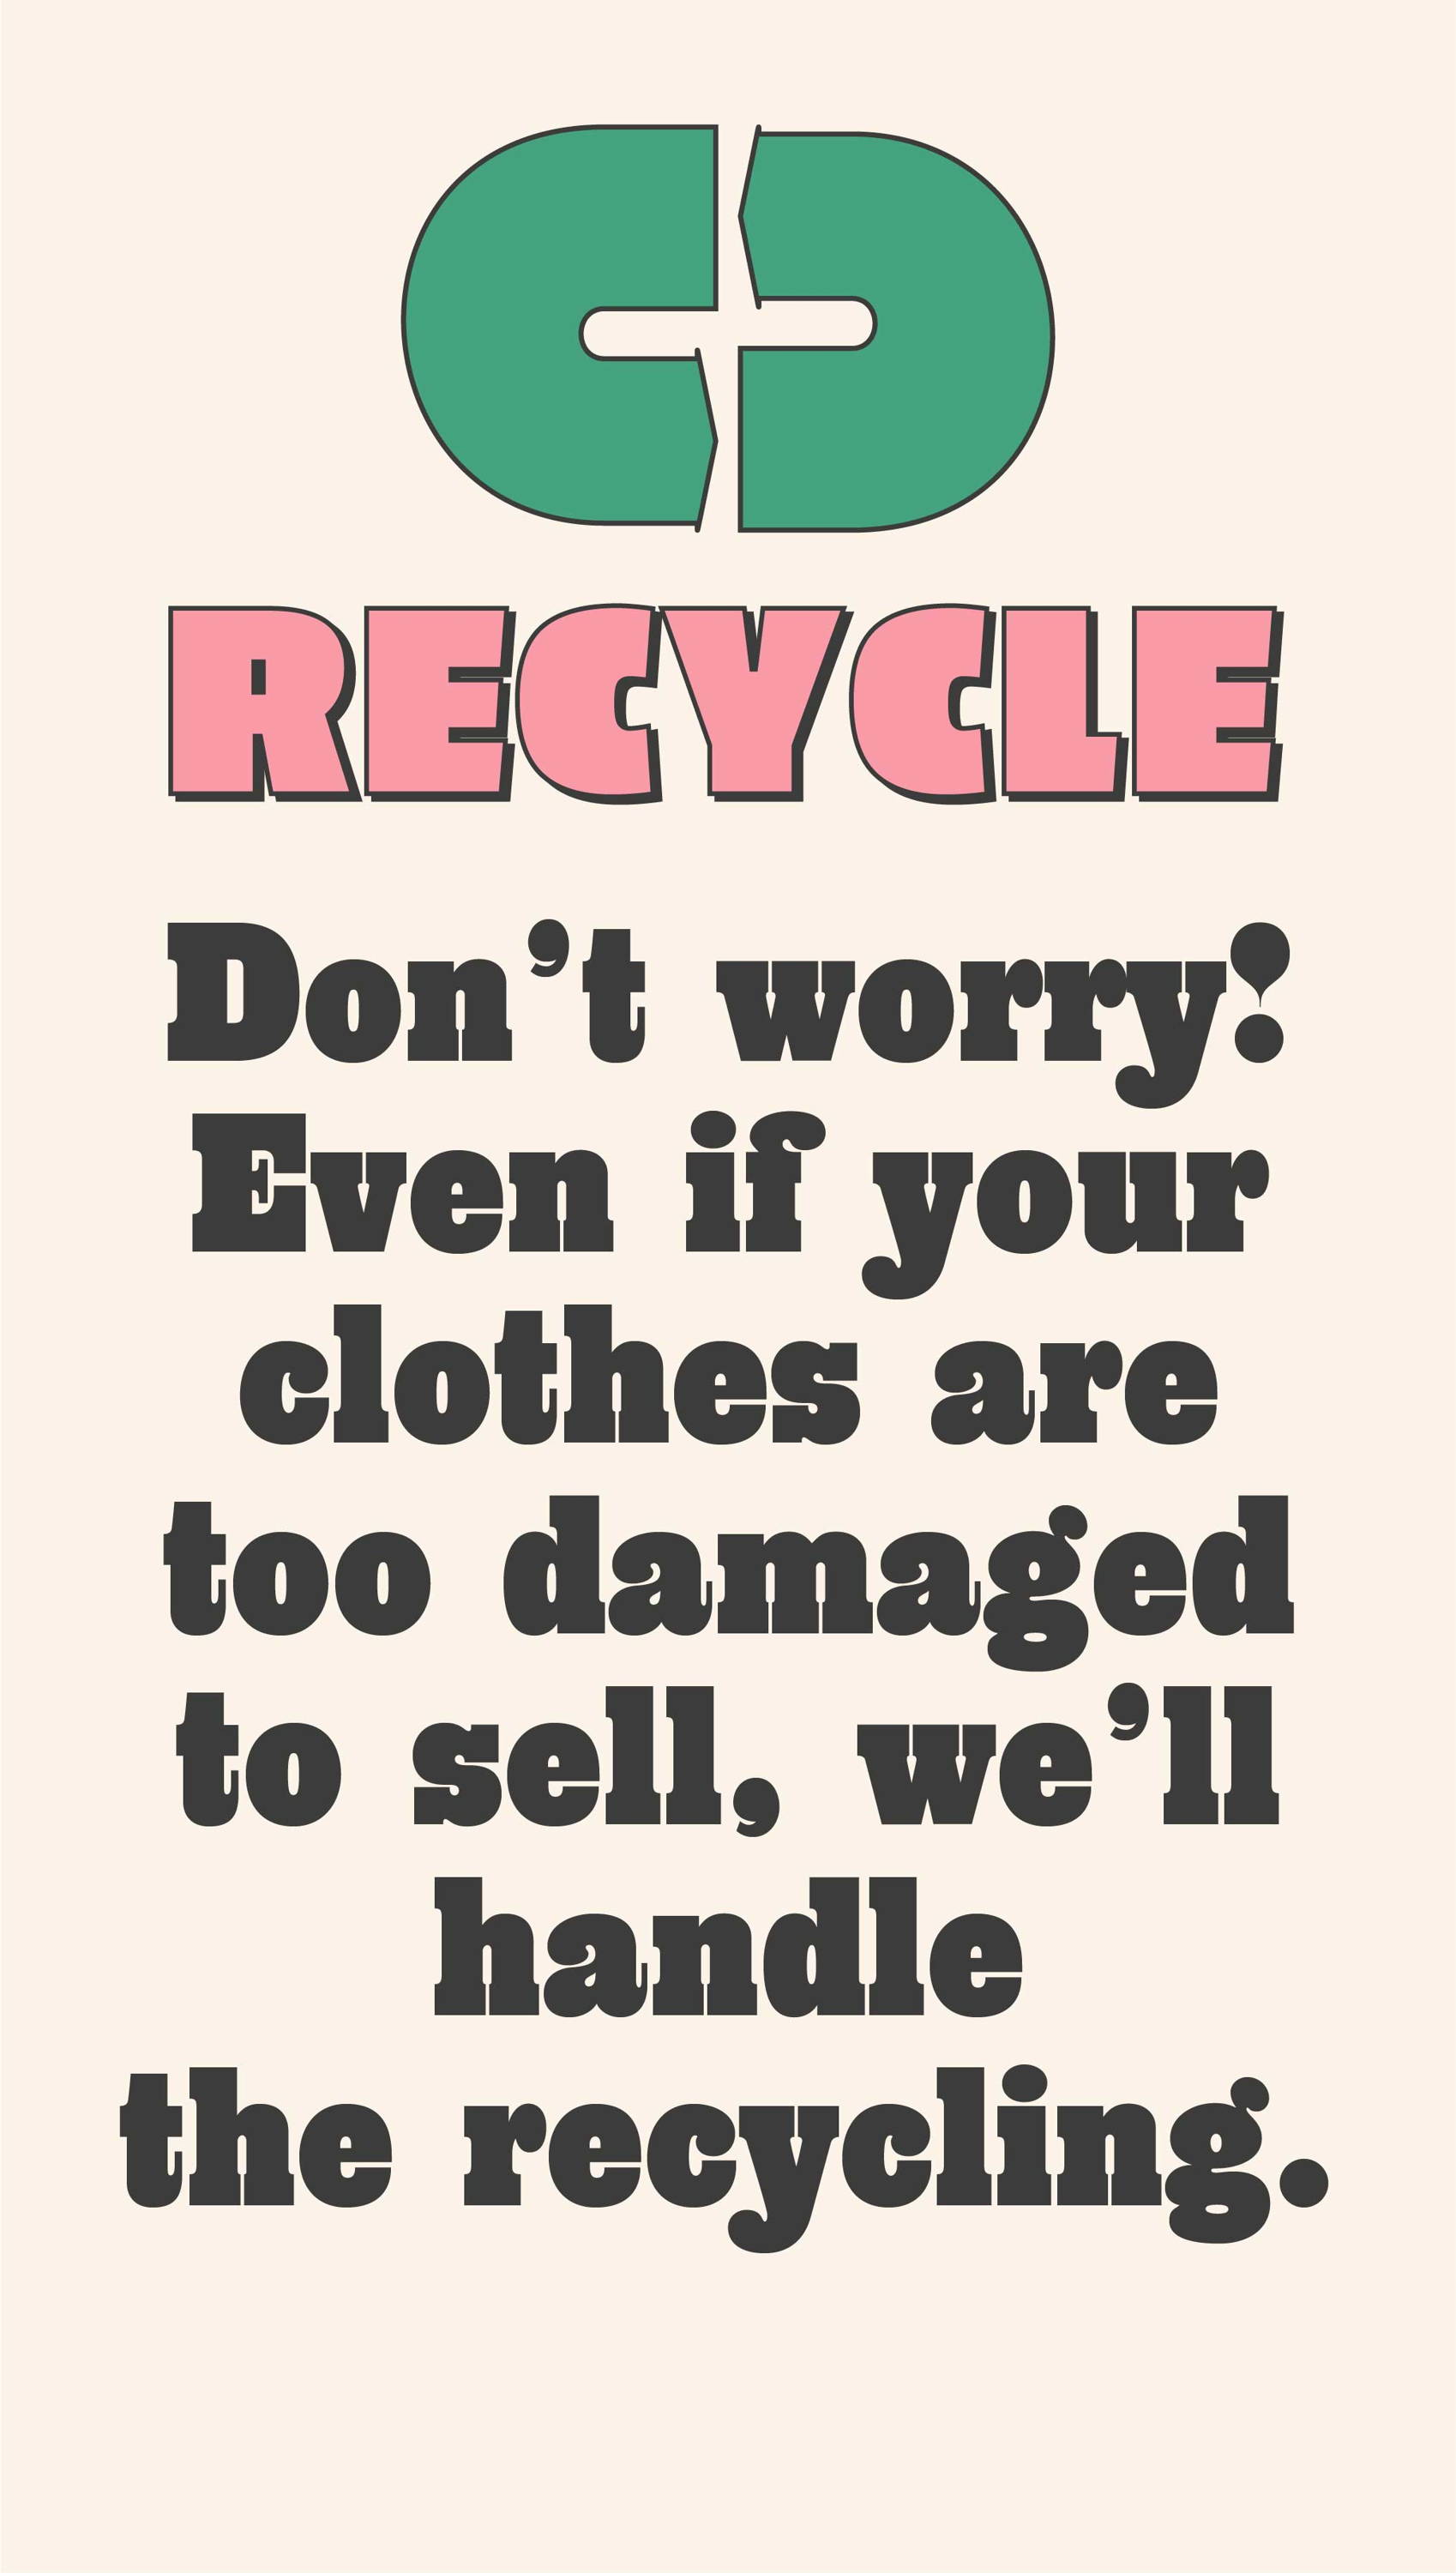 Recycle: For every item you return, we’ll give you a voucher to spend online or in-store.